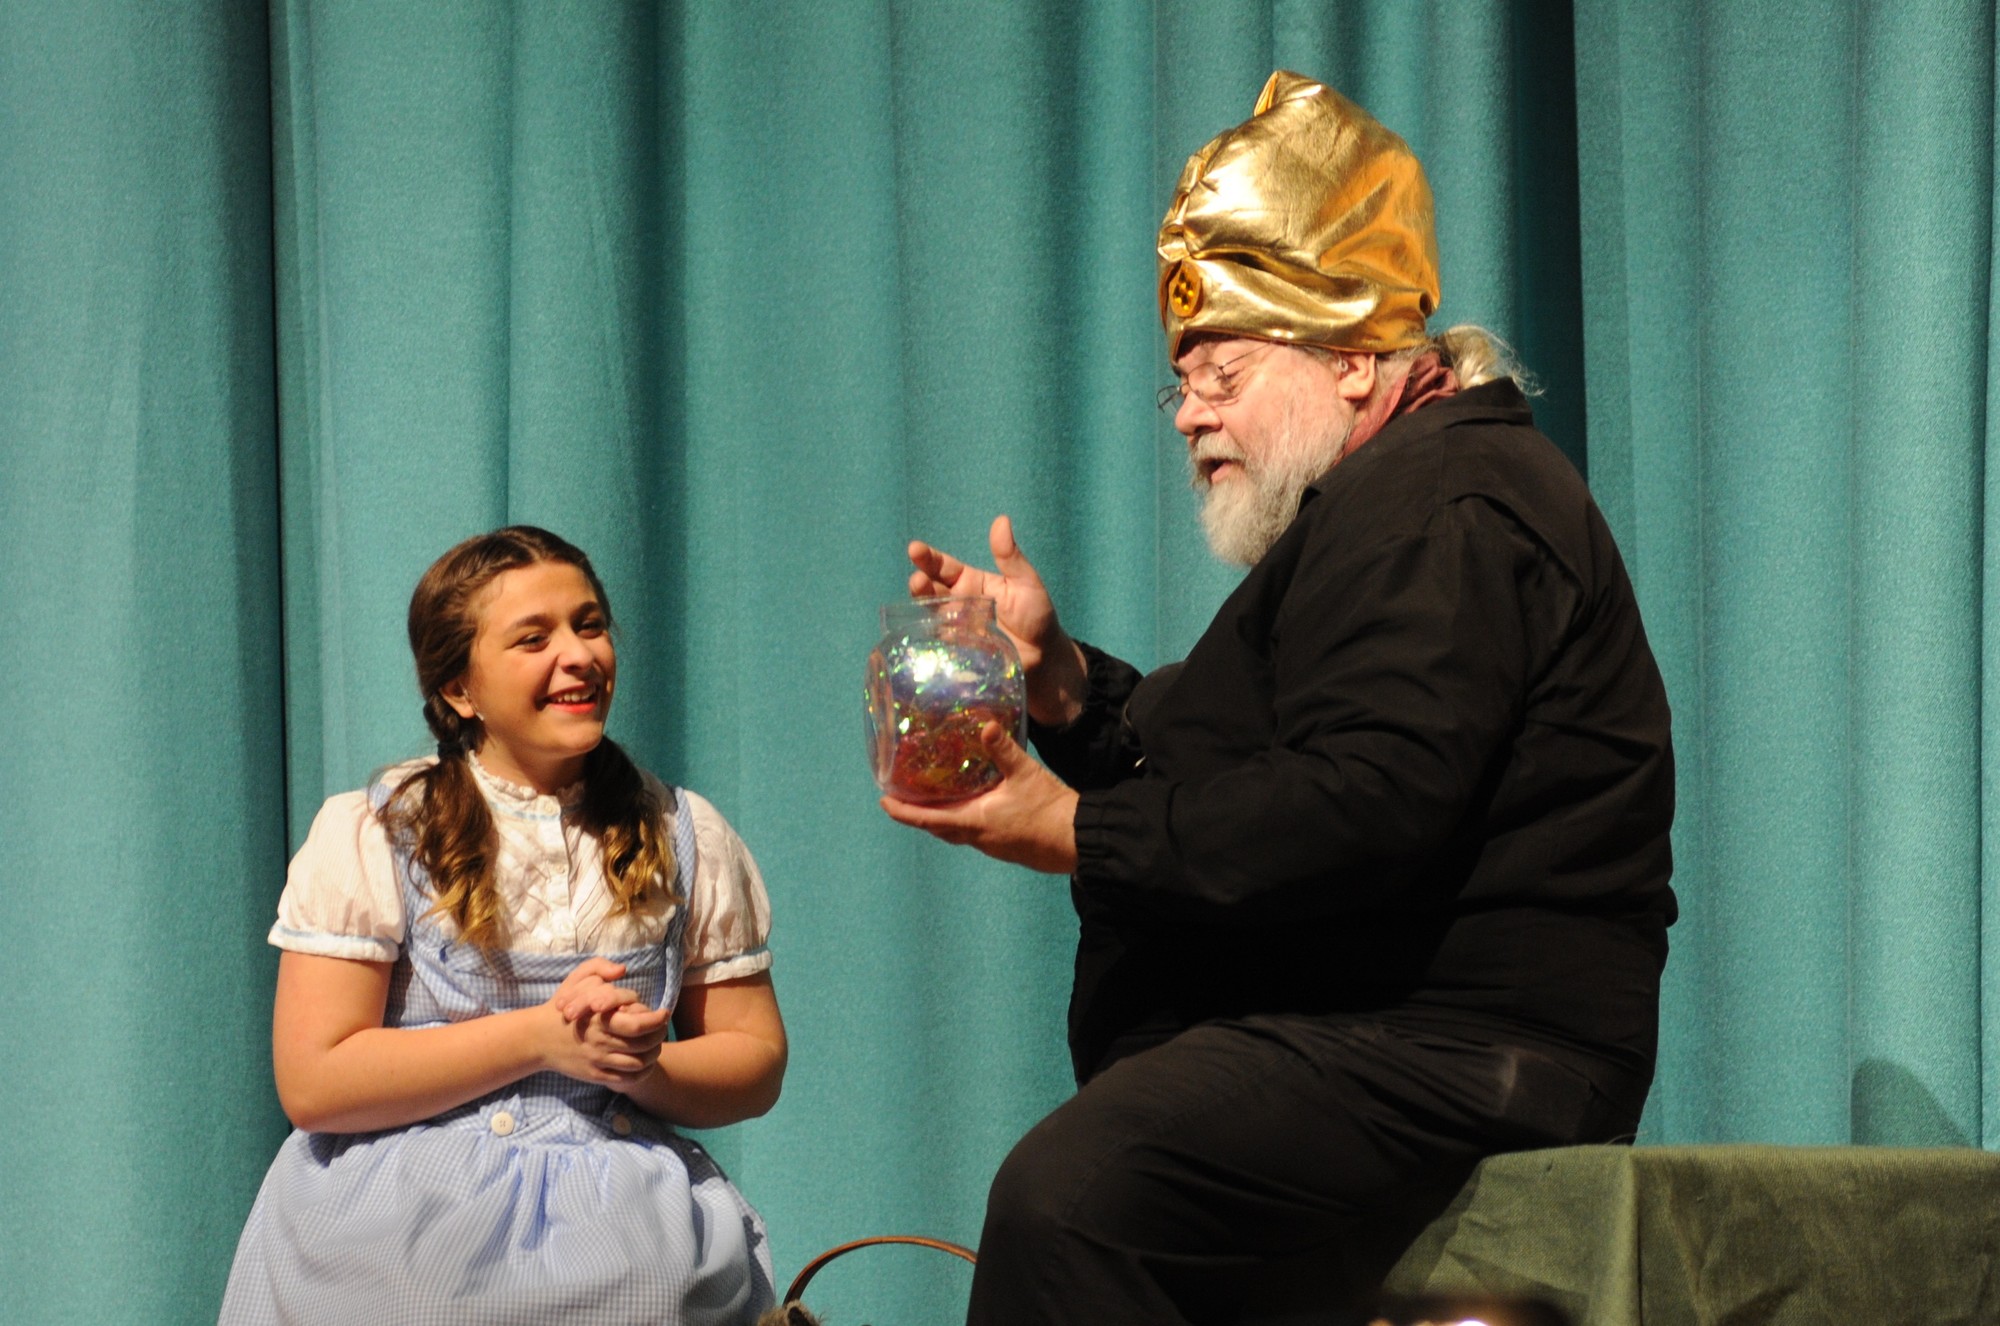 Dorothy met Professor Marvel, played by Michael Ferruzza, who also performed as the Wizard of Oz.